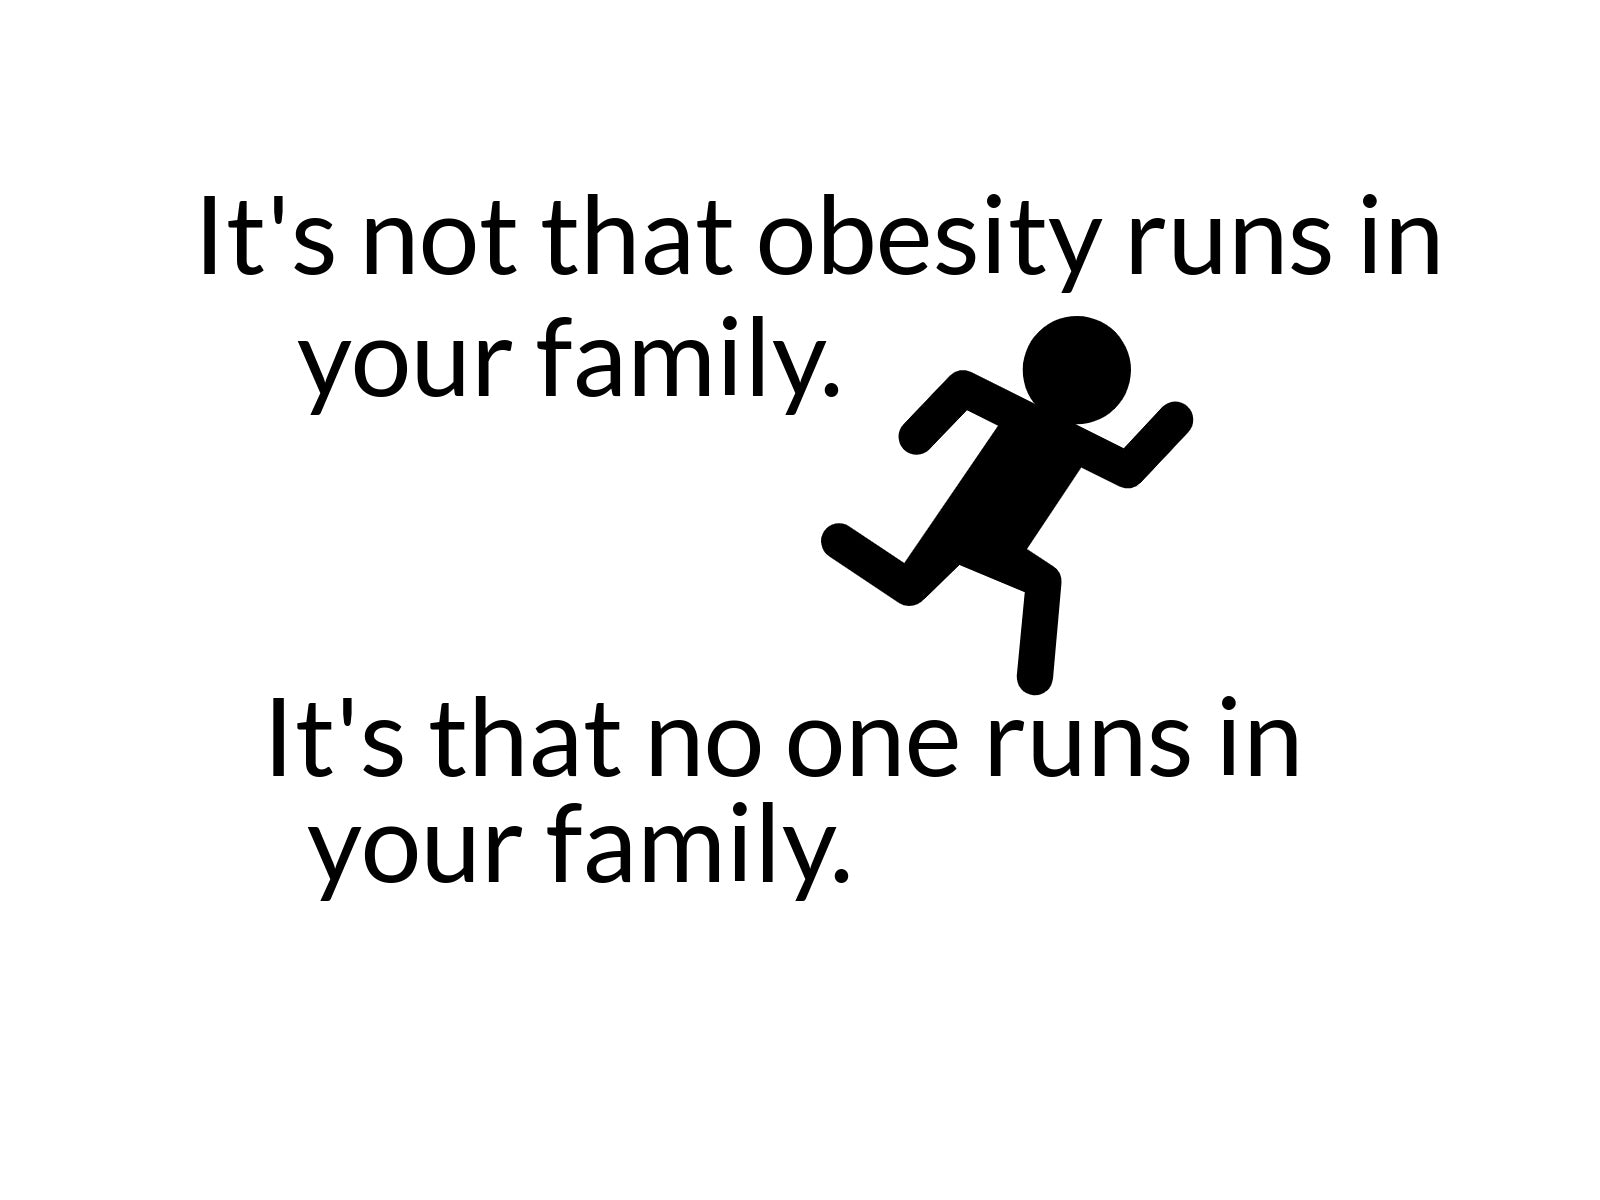 It's not that obesity runs in your family. It's that no one runs in your family.